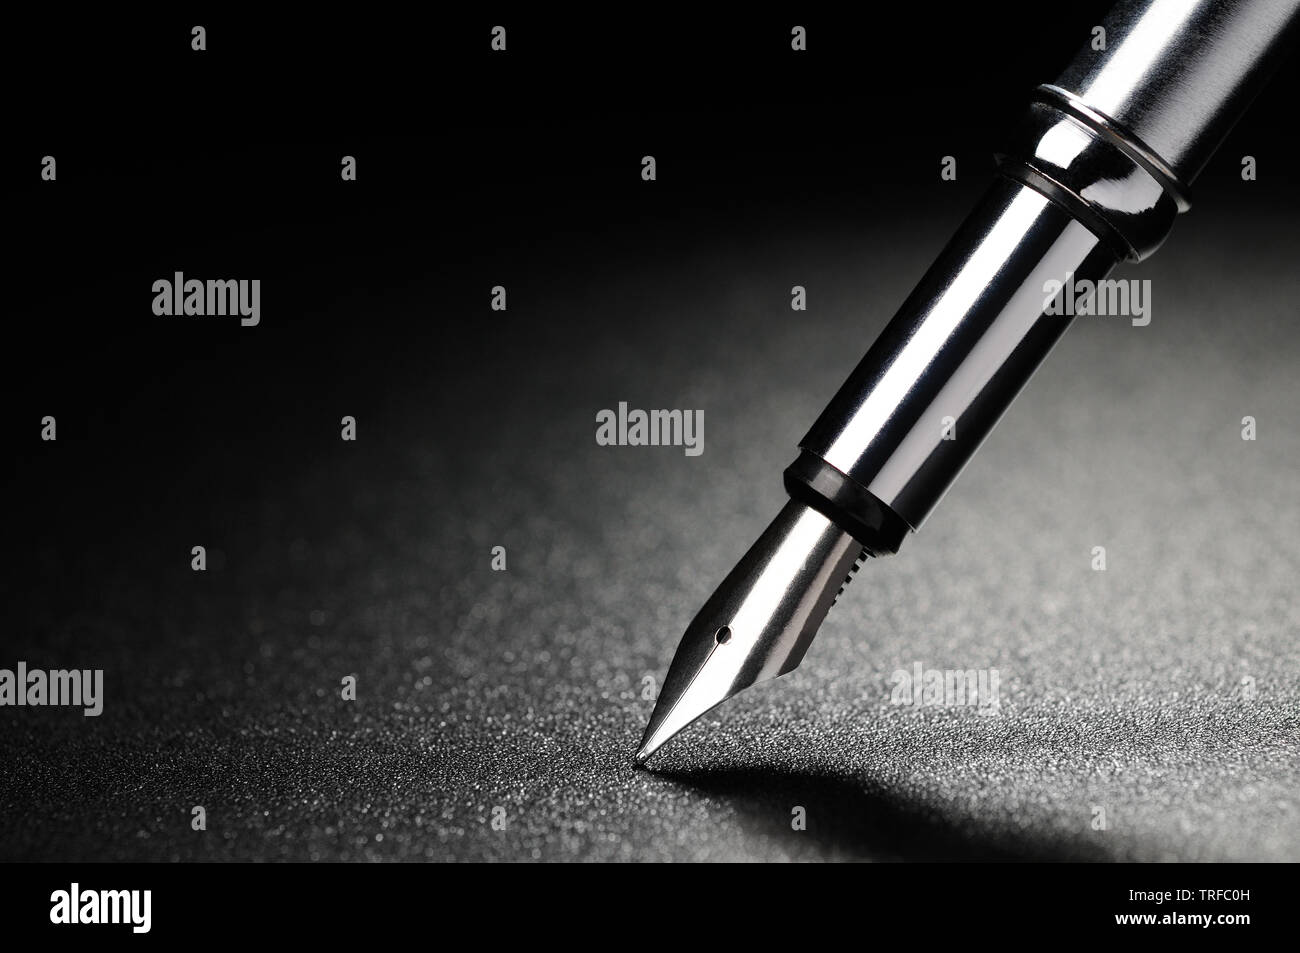 Old fountain pen on a black textured background Stock Photo